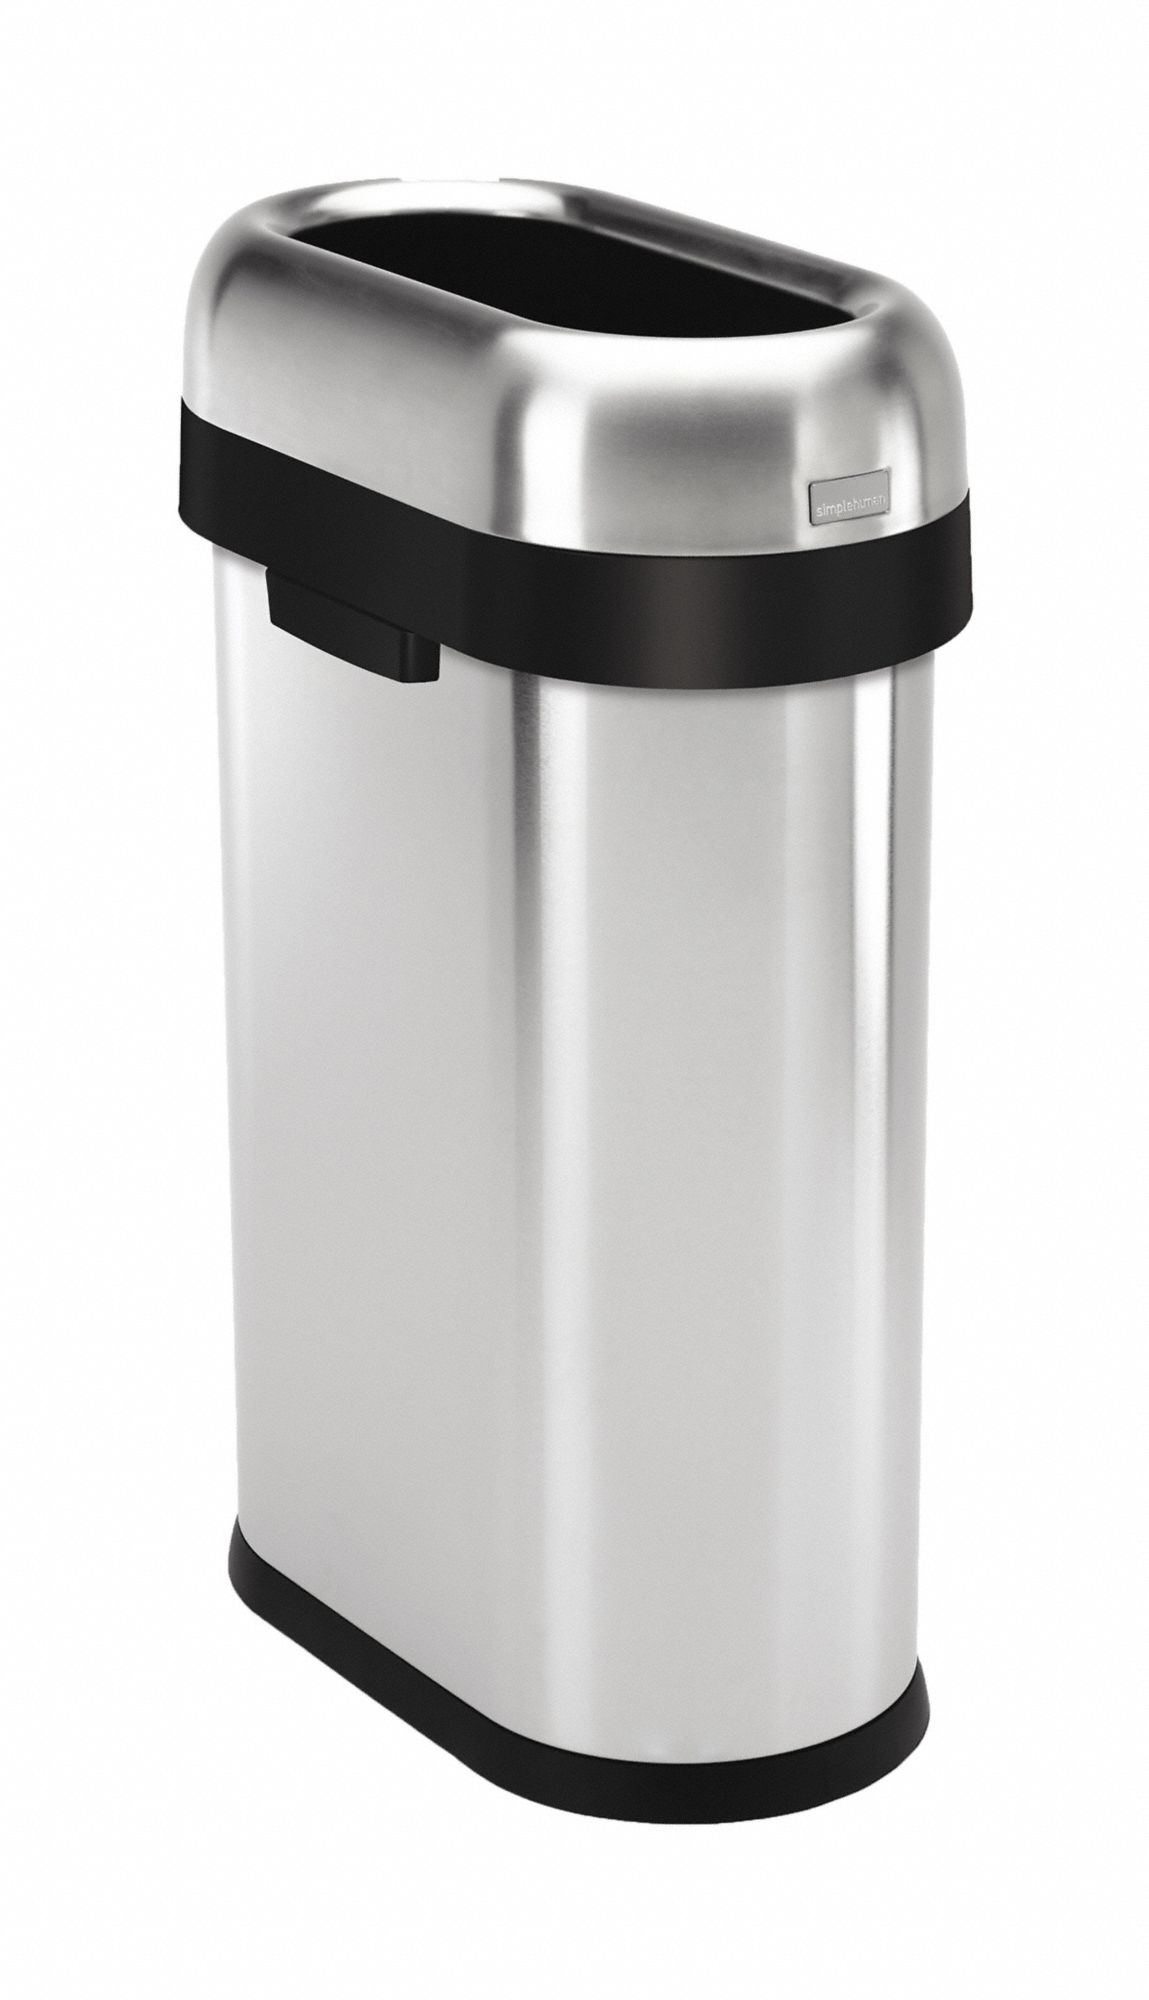 Trash Can: Stainless Steel, Dome Top, Silver, 13 gal Capacity, 10 7/10 in Wd/Dia